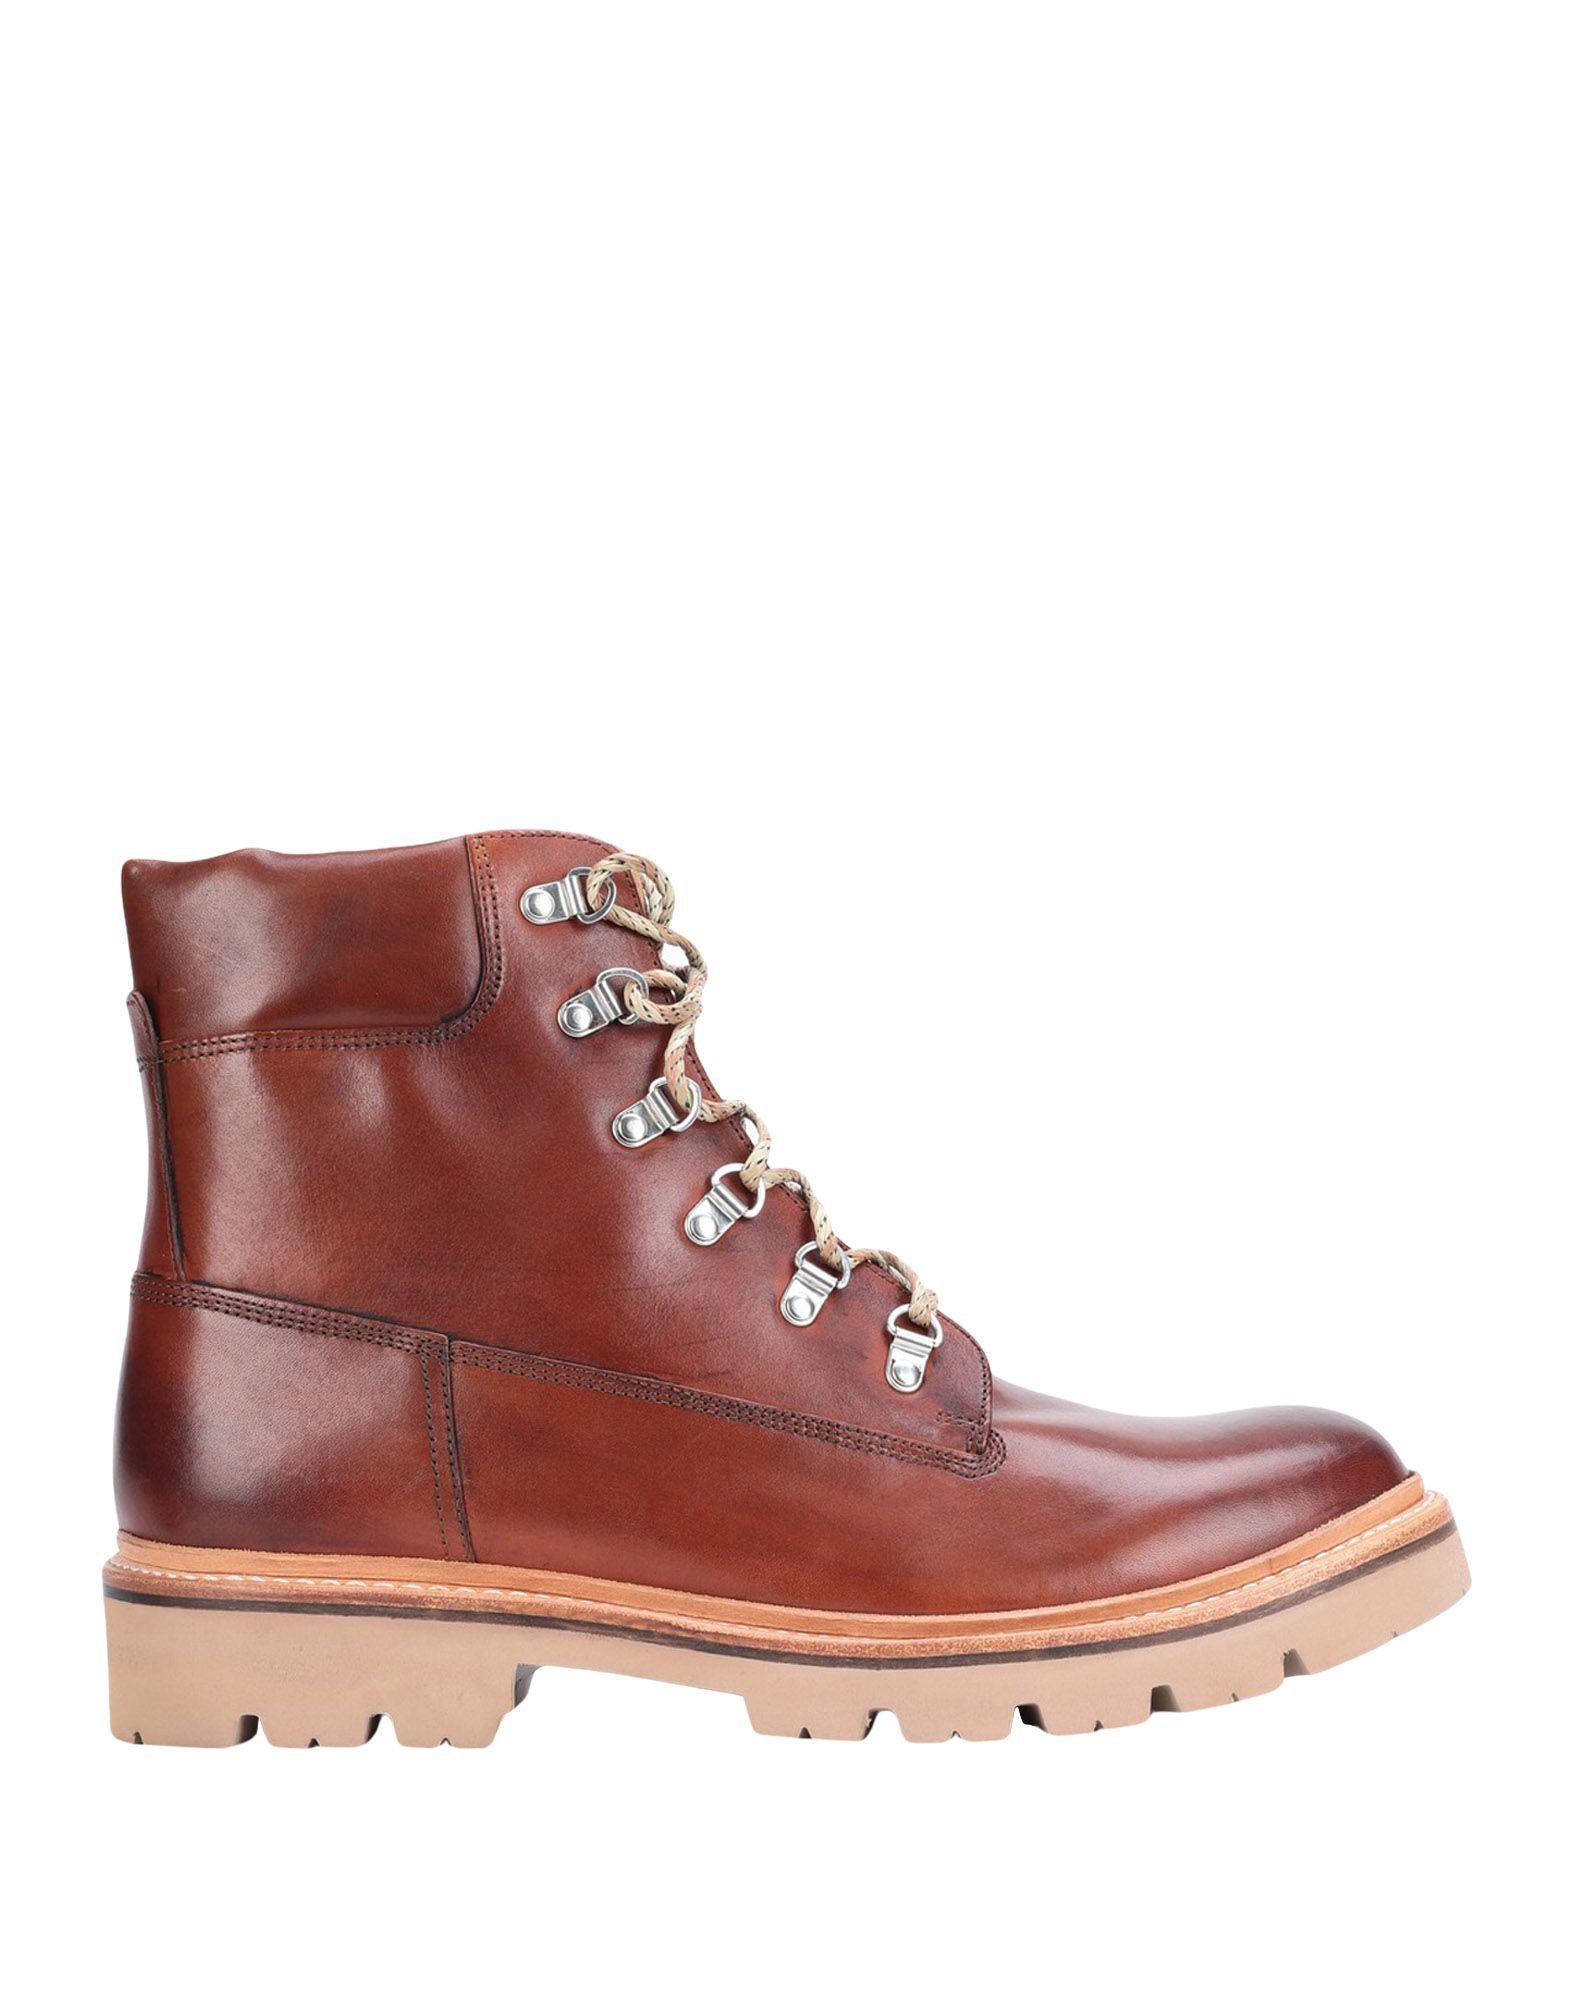 Grenson Ankle Boots in Brown for Men - Lyst